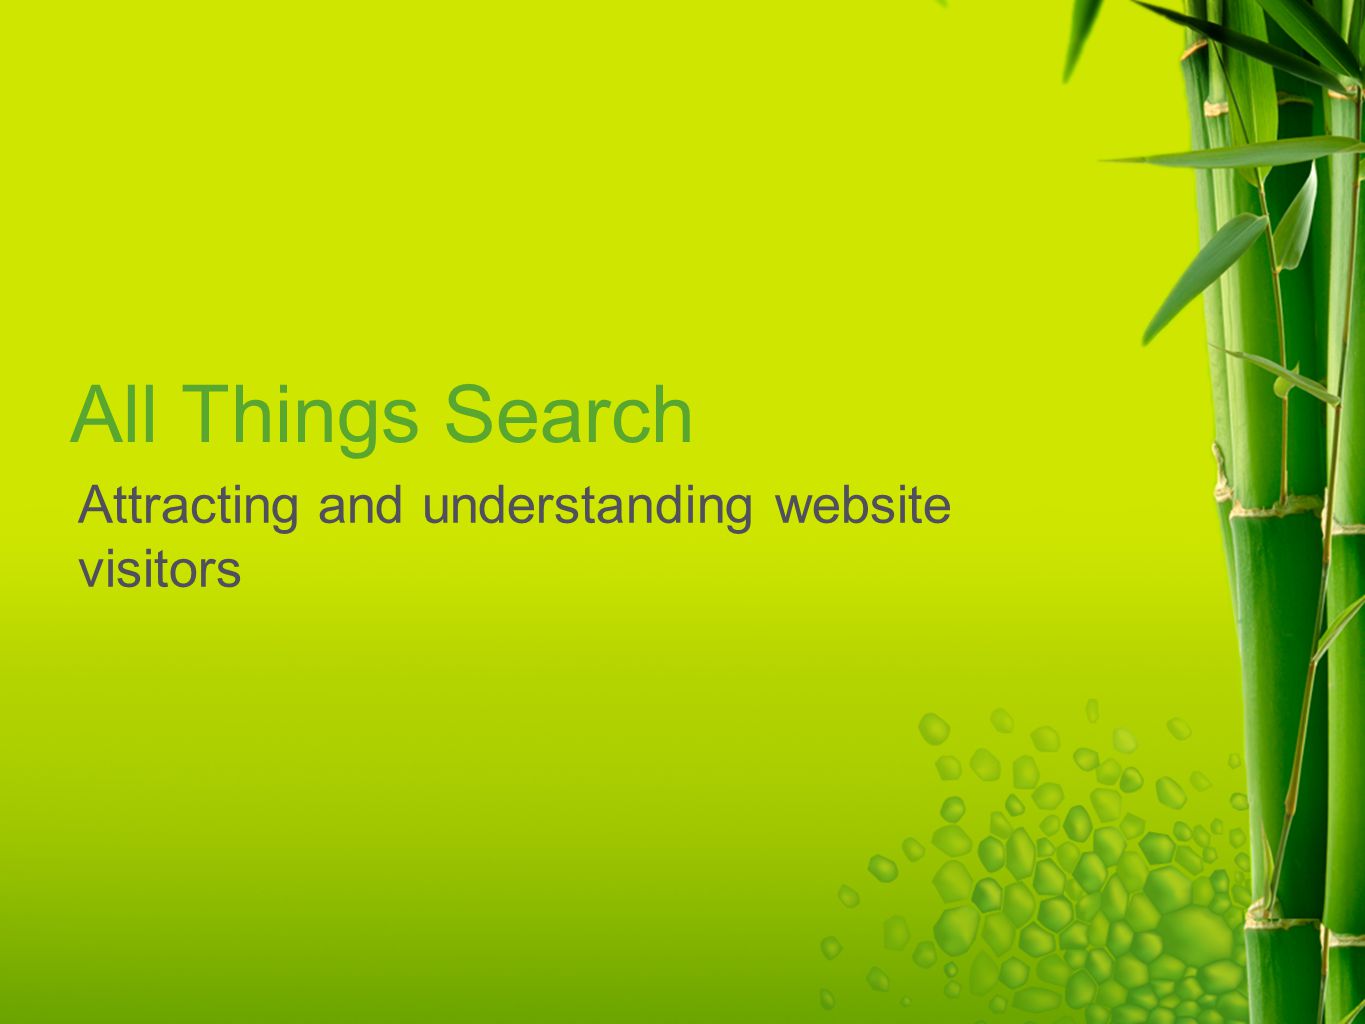 All Things Search Attracting and understanding website visitors